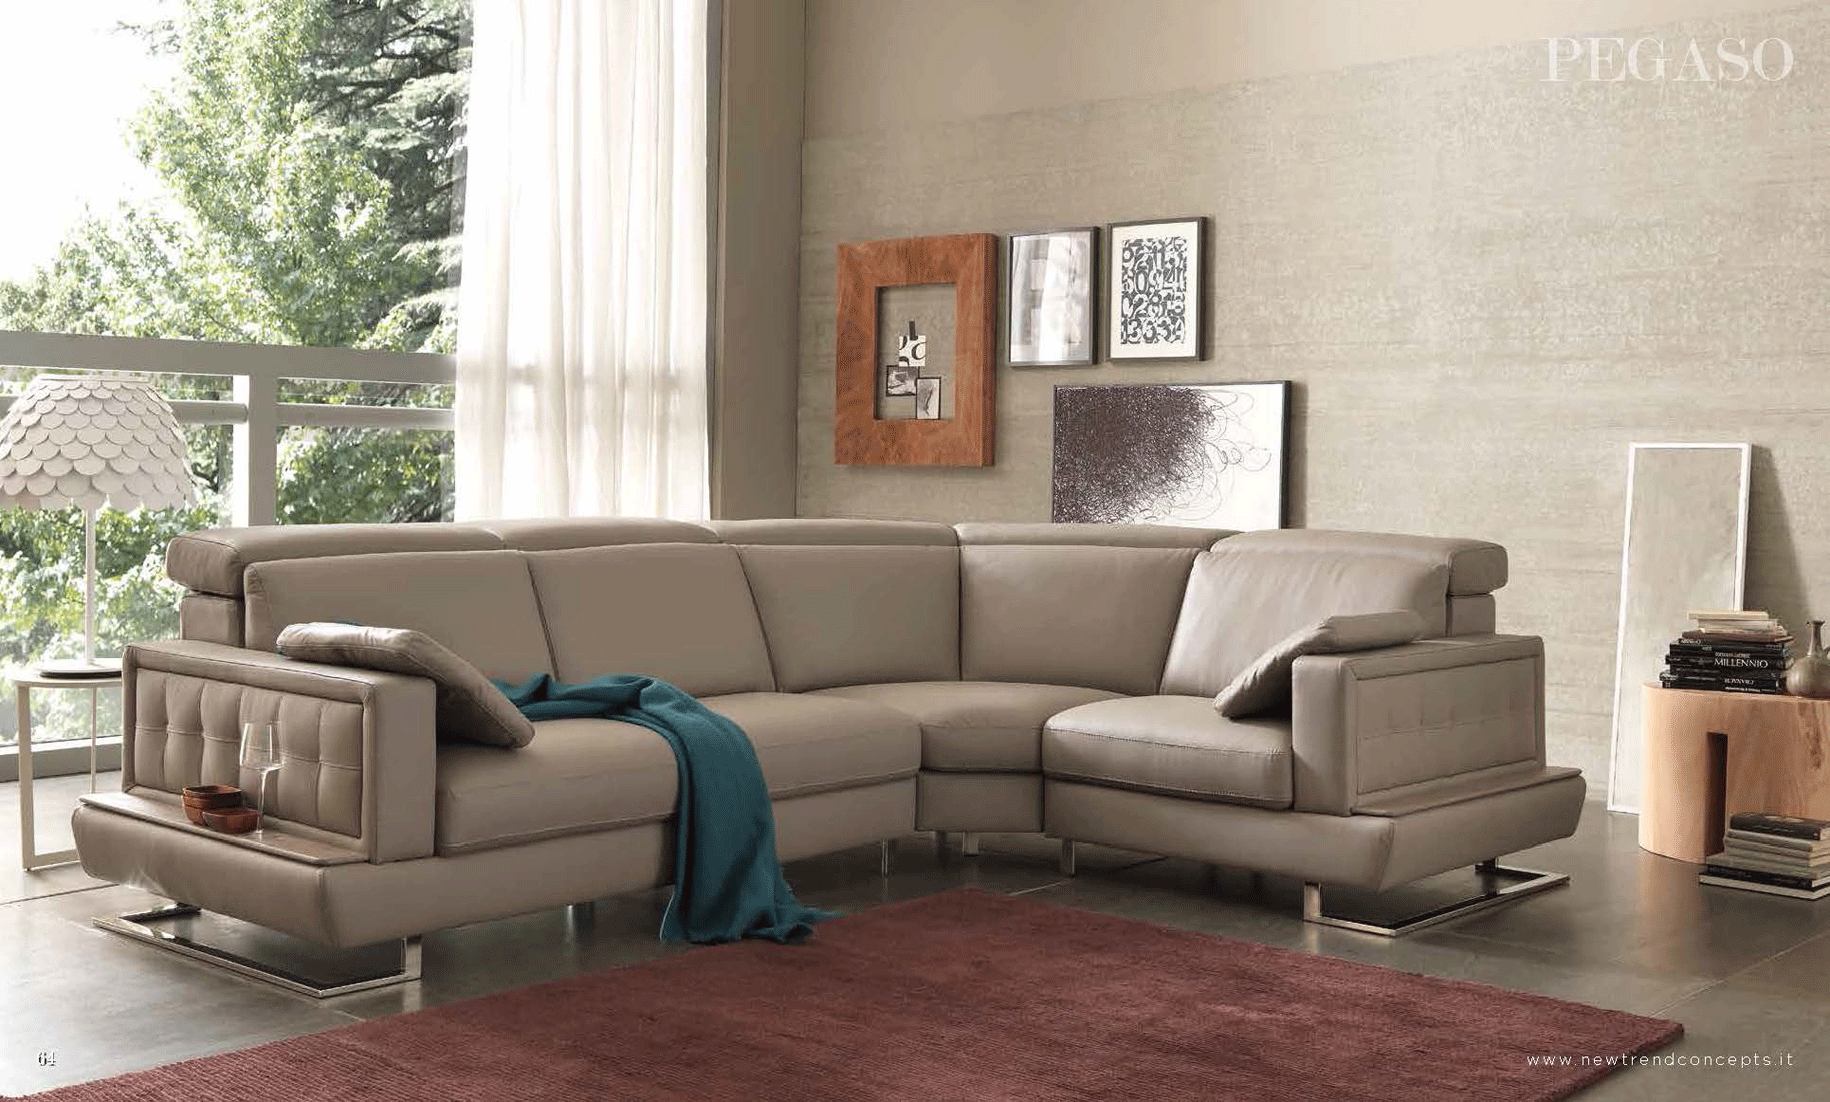 Living Room Furniture Sofas Loveseats and Chairs Pegaso